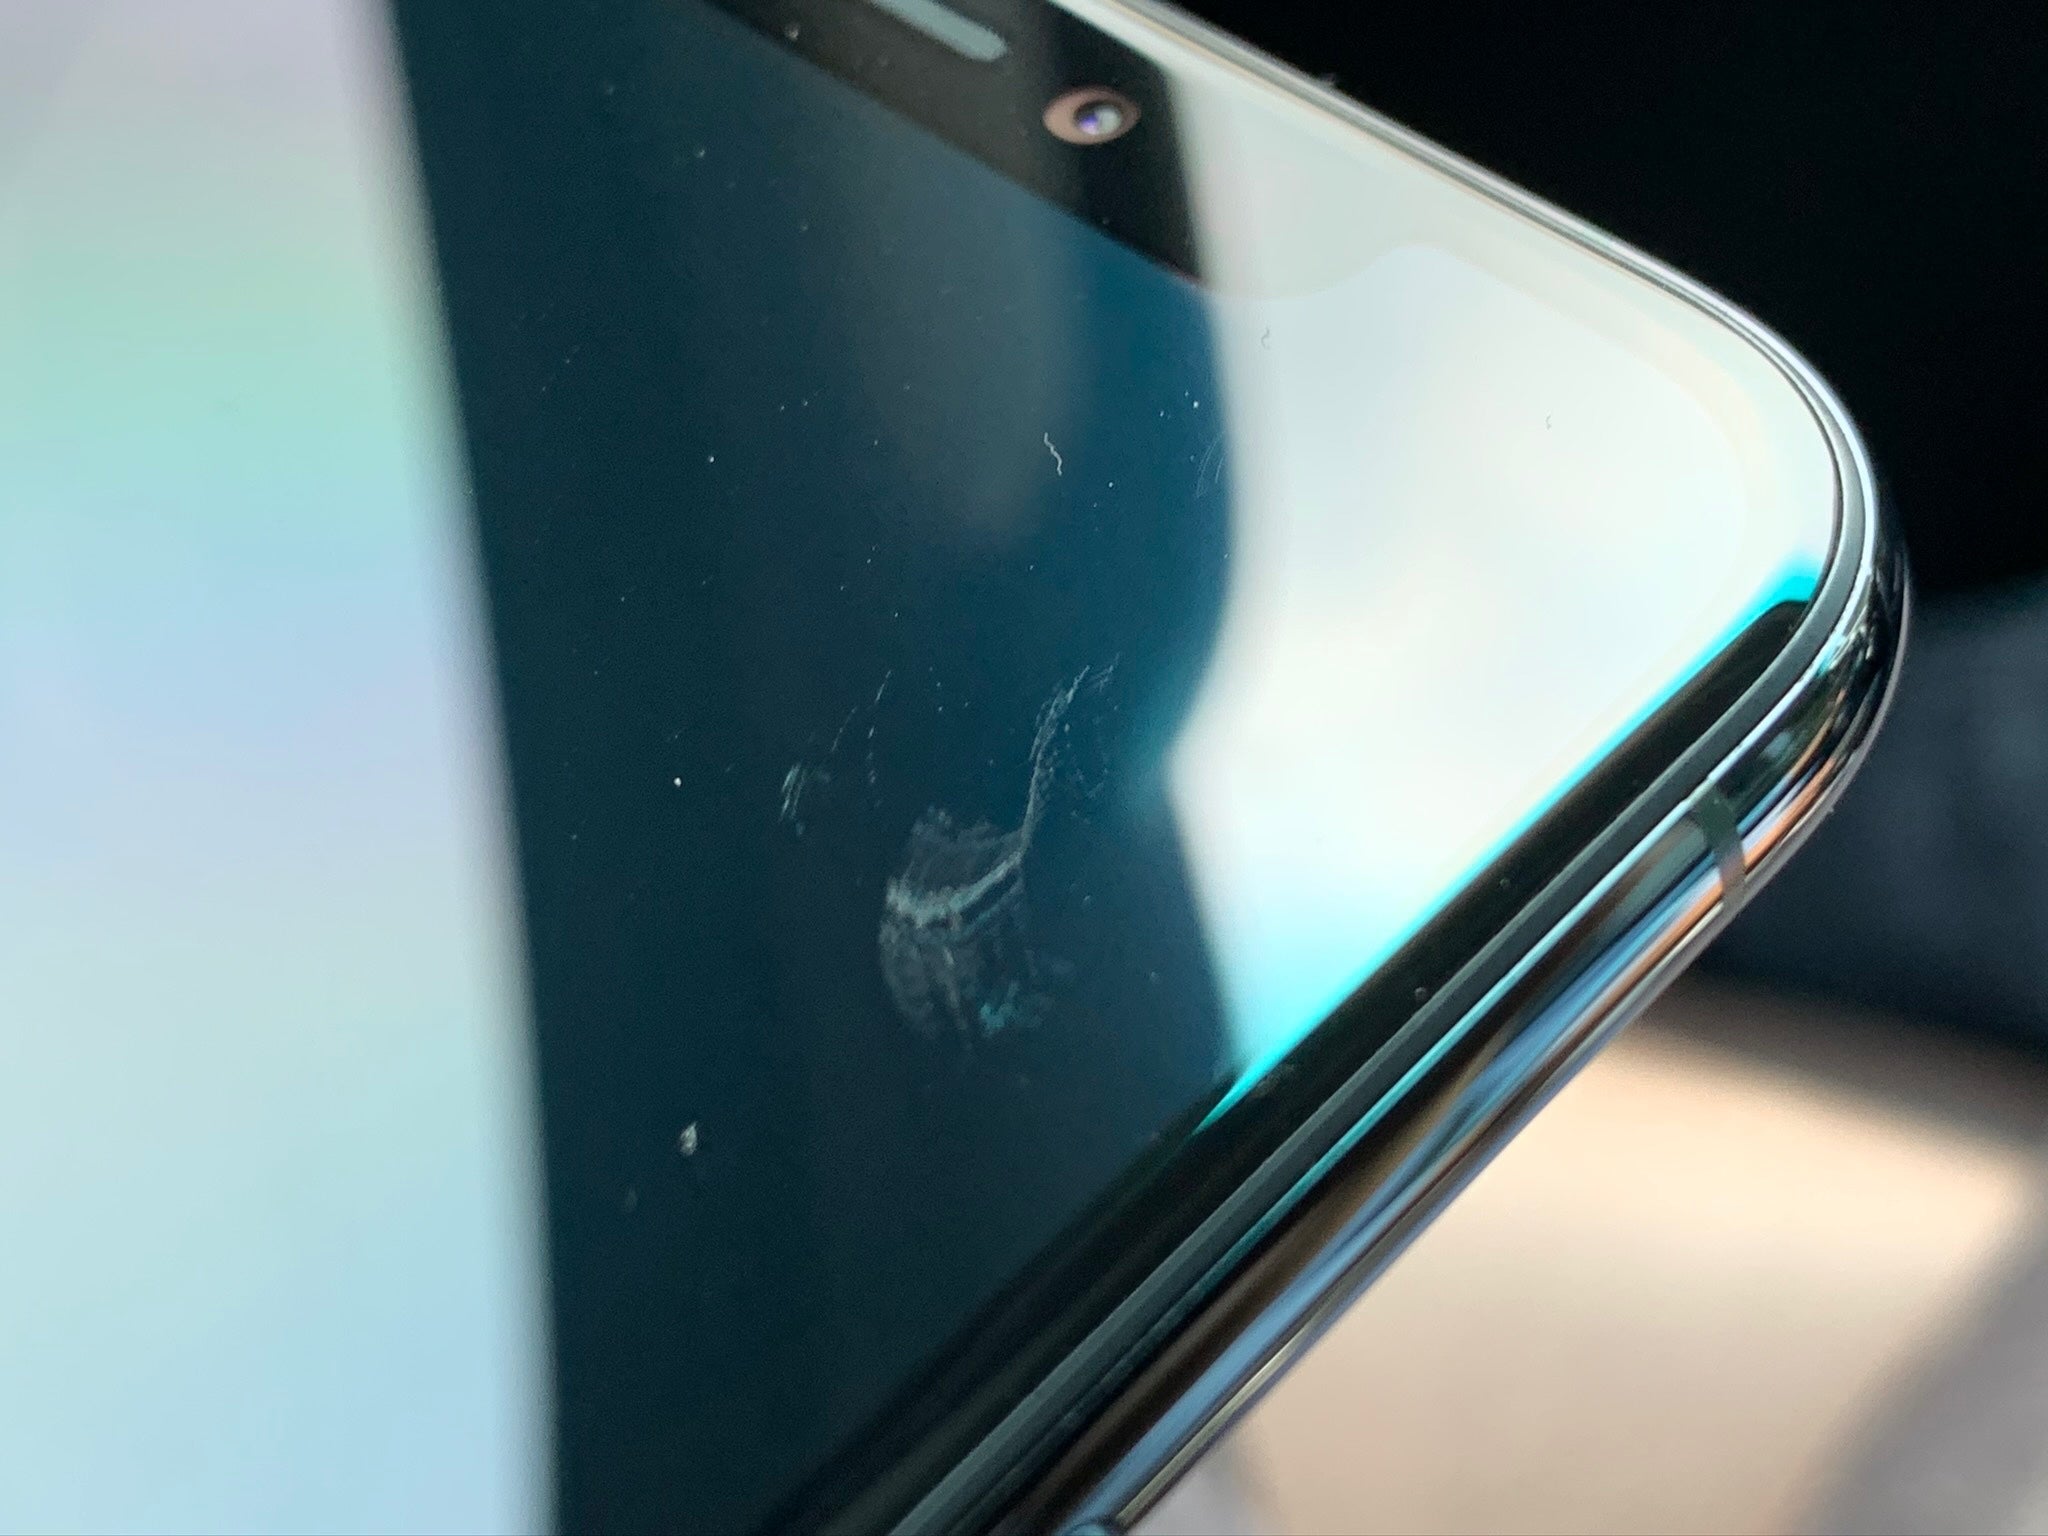 Photo from iPhone 11 user shows a scratch on the handset's display - Issue with new iPhone models contradicts a major claim made by Apple